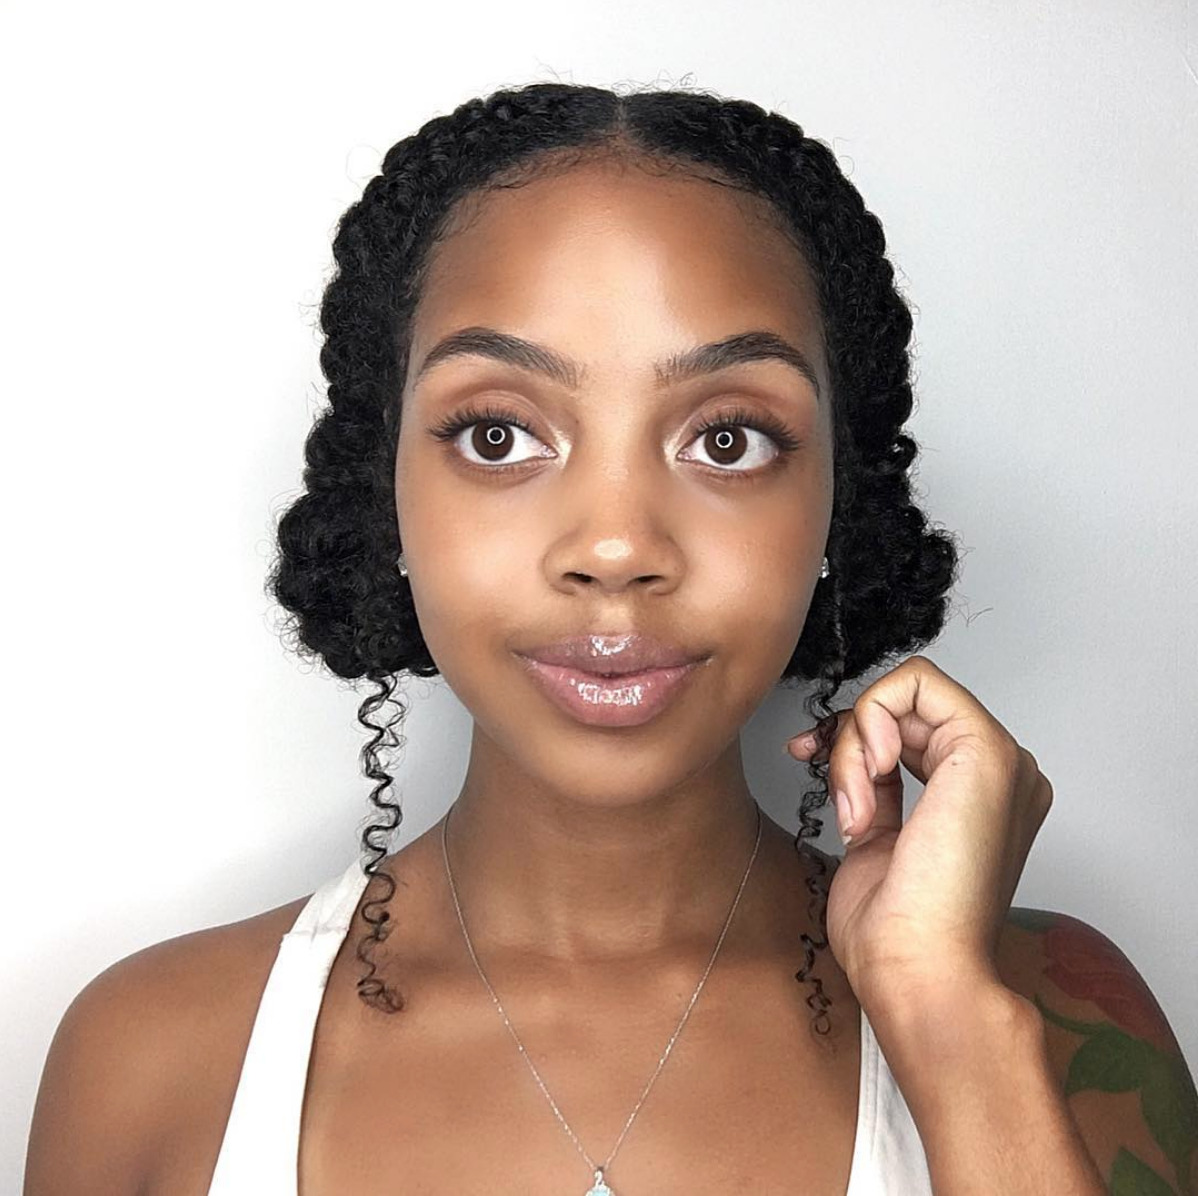 naturalhairqueens:Pretty eyes and pretty hair and those brows are so neat and beautiful!